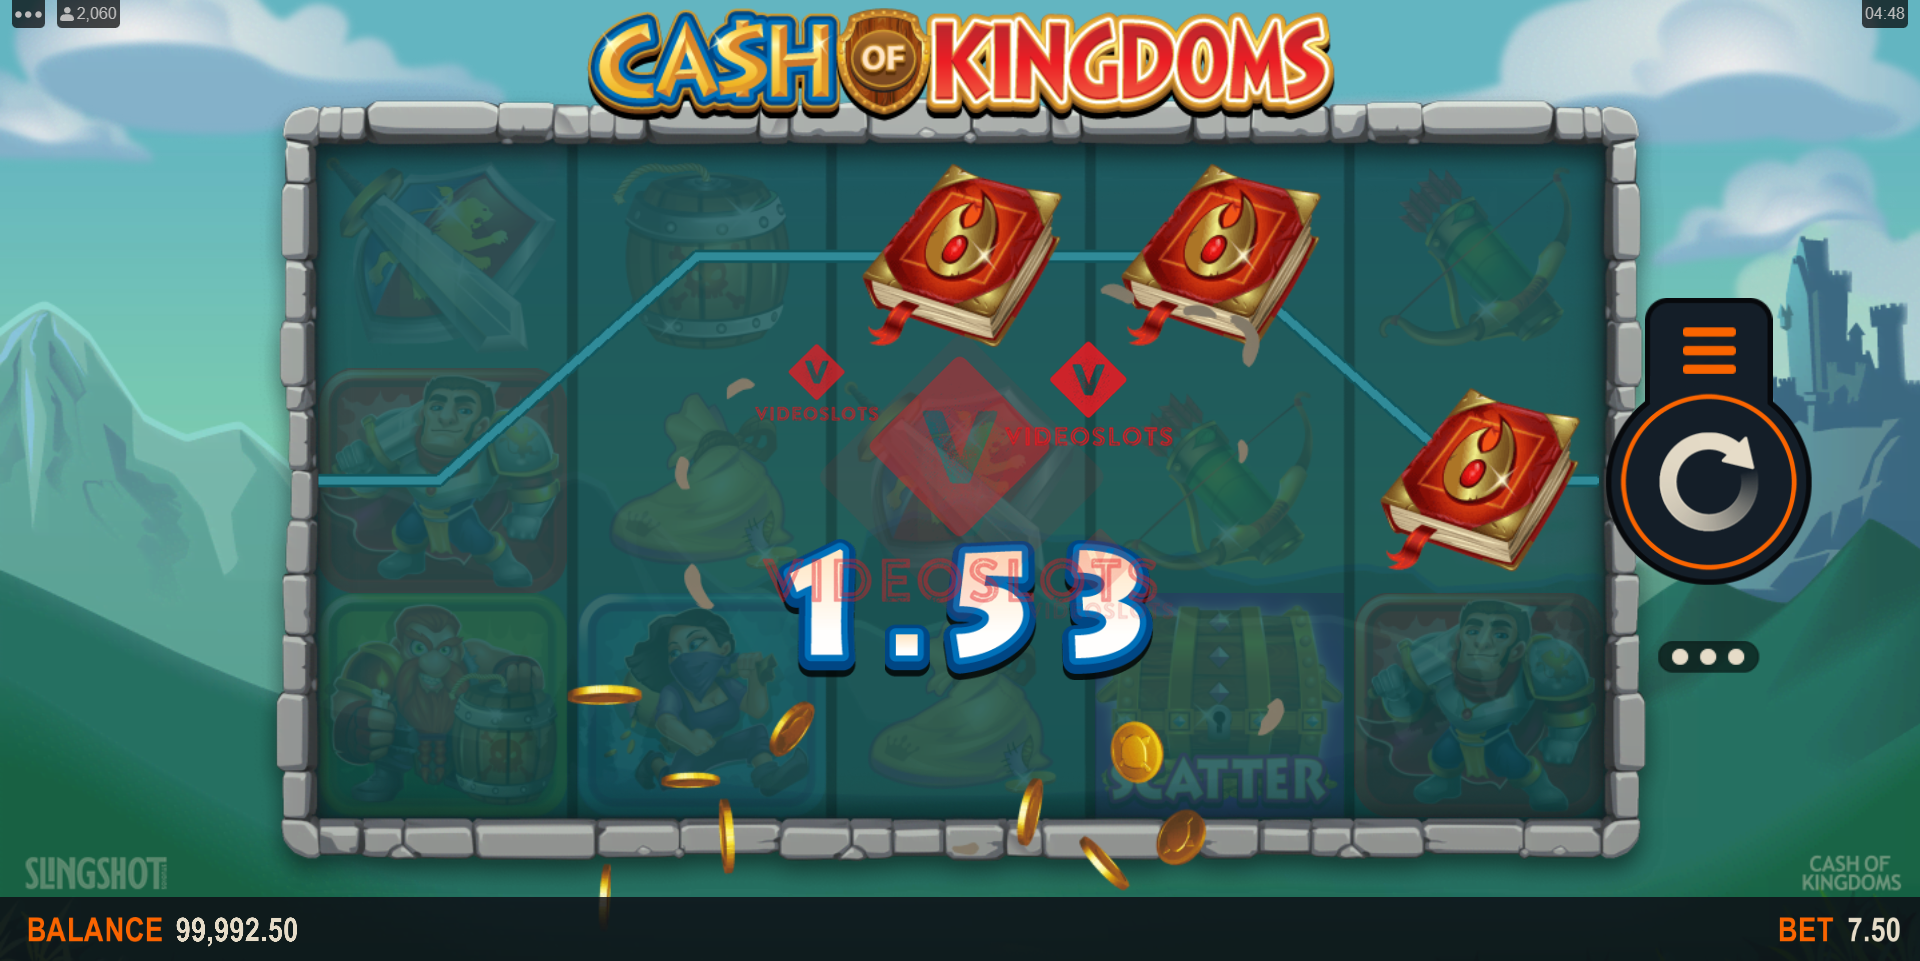 Base Game for Cash of Kingdoms slot for Microgaming